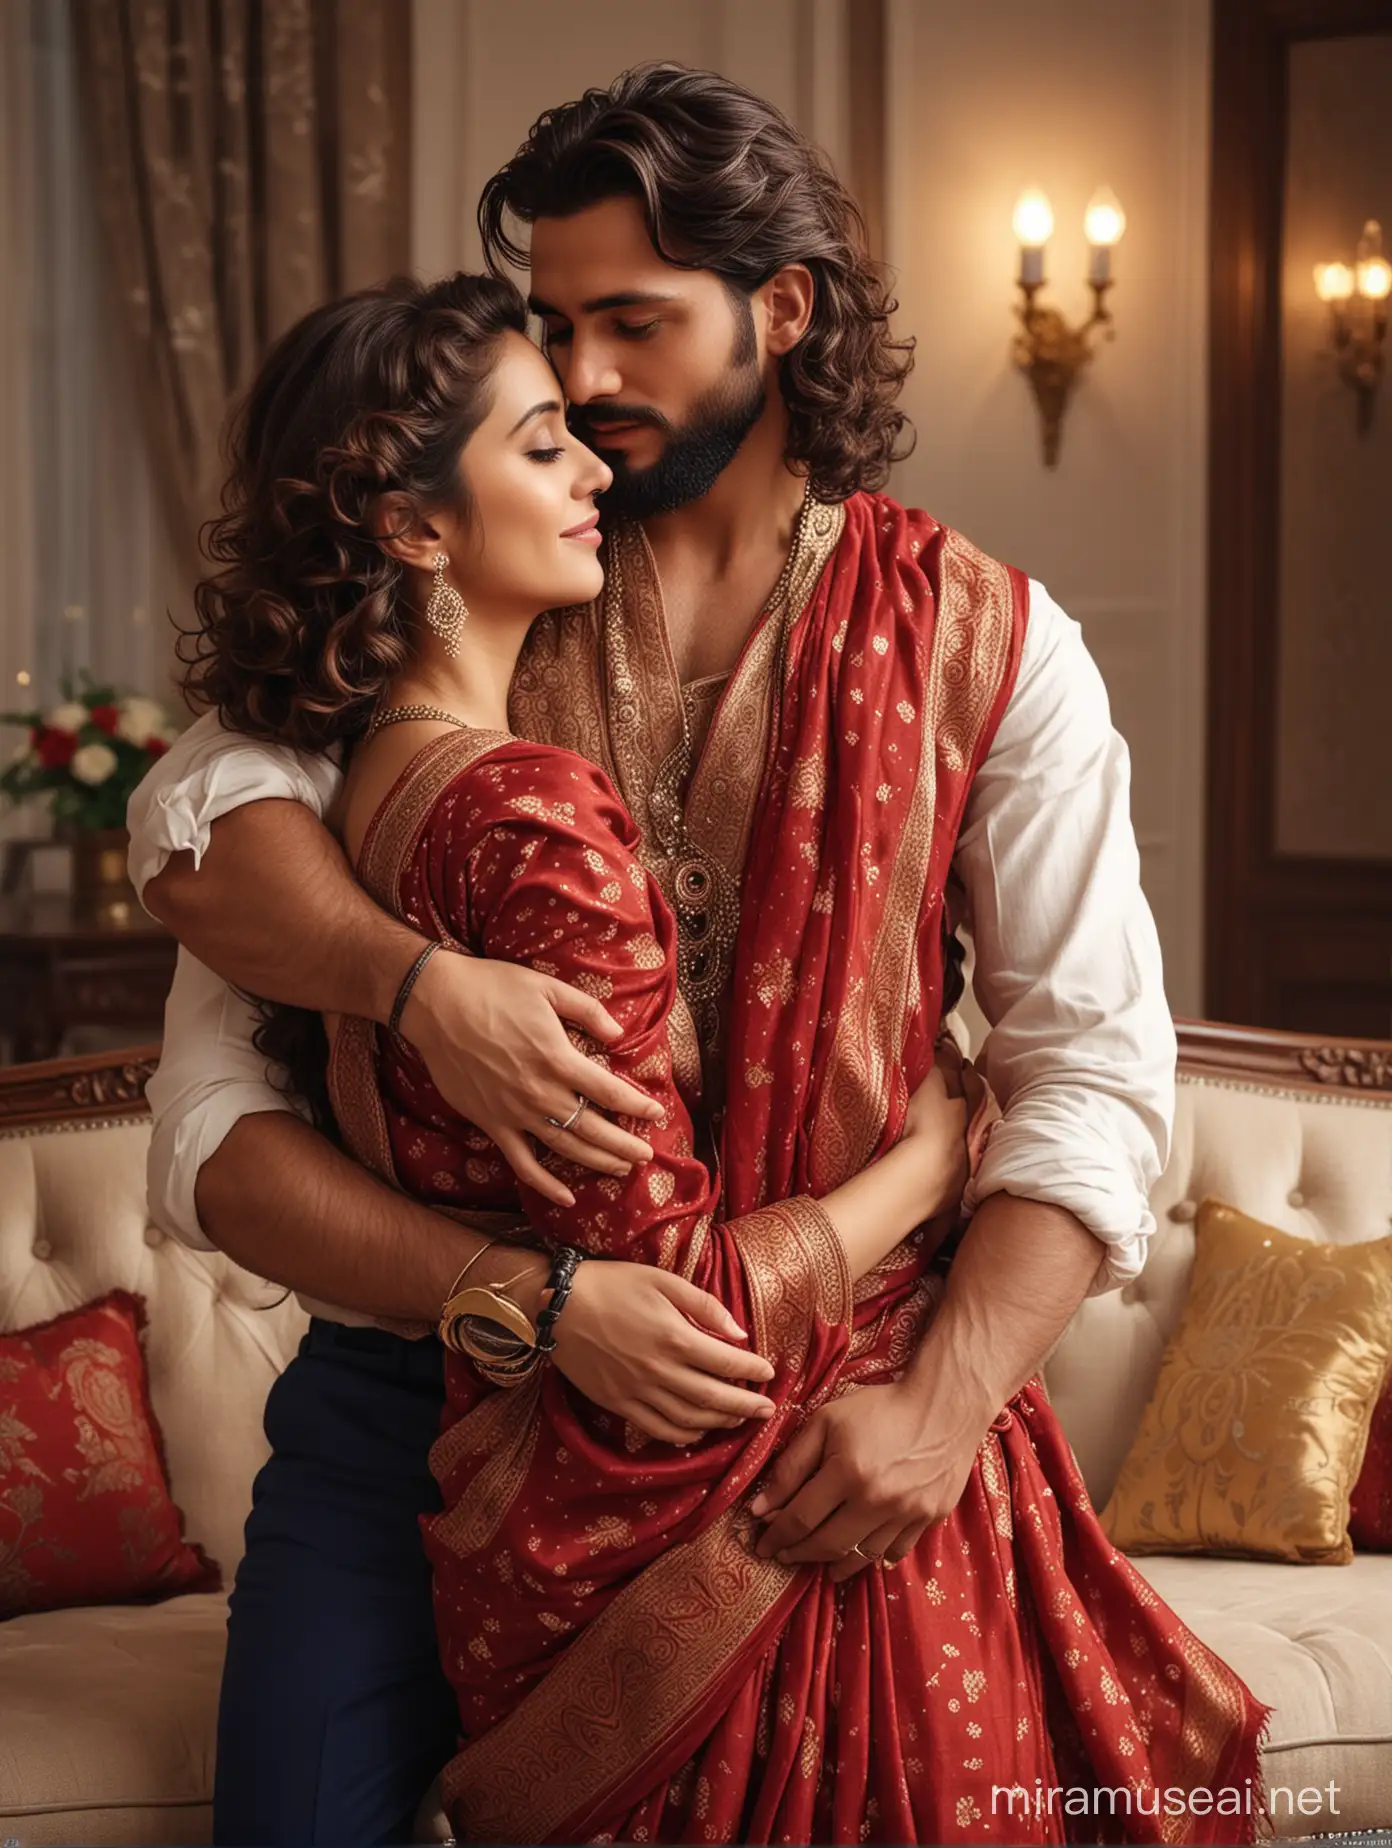 full body view  of most beautiful european couple as most beautiful indian couple, most beautiful girl in elegant bold color saree and long curly hairs, hairs tied  up with hair style stylishly, necklace,   big wide black  eyes, full face, perfect red dot, makeup, low cut neck, girl embracing with emotion and possessive feeling, pressing face to chest of man, emotional crying with longing feeling, innocence and ecstasy, hands around man neck, man comforting her,  man with stylish beard, perfect hair cut, formals, perfect limbs and fingers, photo realistic, 4k.
background,spacious modern elite photo room, with luxury sofa set, cream color carpet, elegant interior designs, vintage lamps, romantic reunion ambience, photorealistic, vibrant colors, intricate details, 8k.